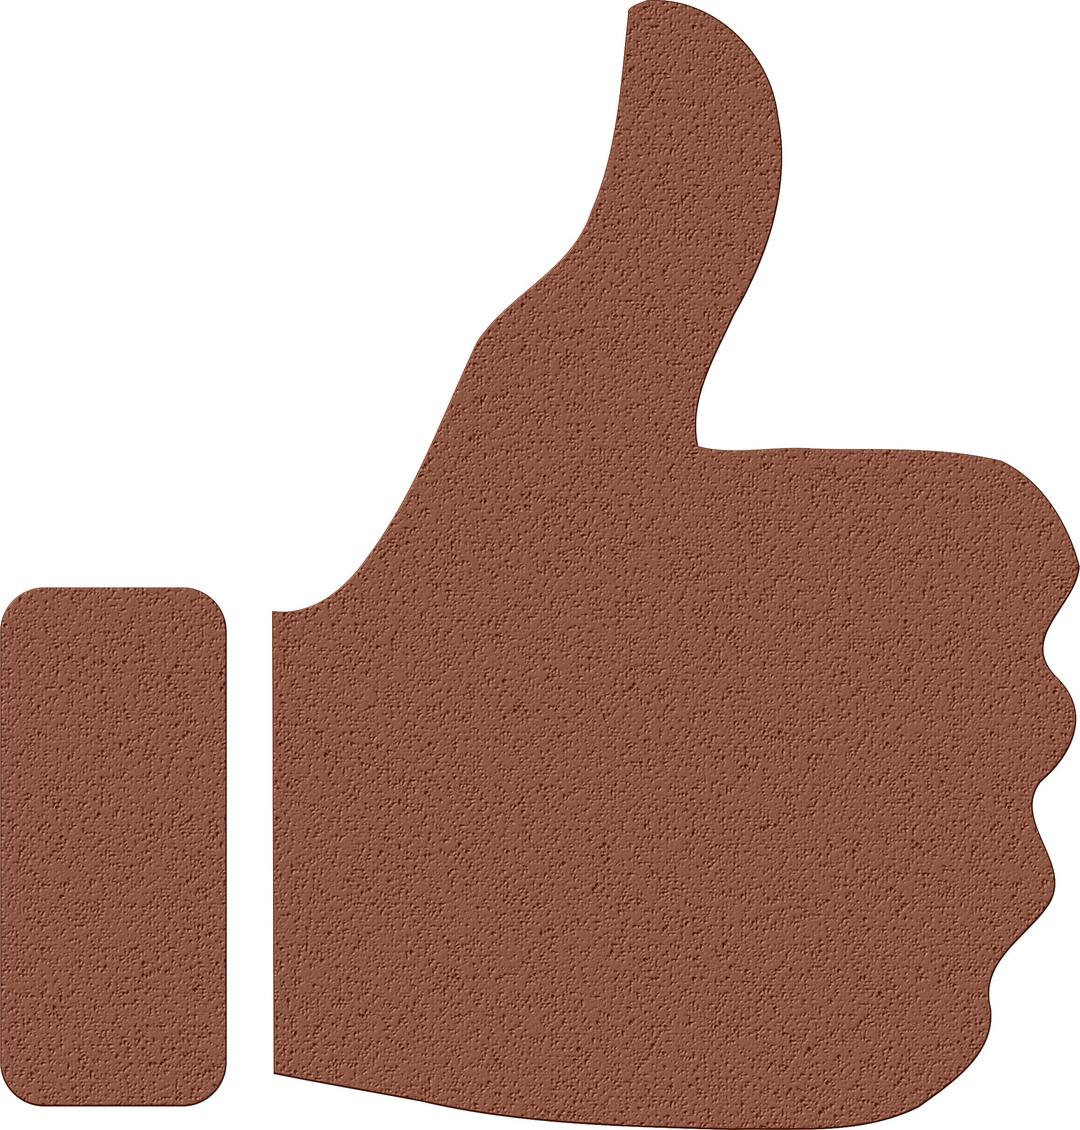 Gloved Thumbs Up png transparent